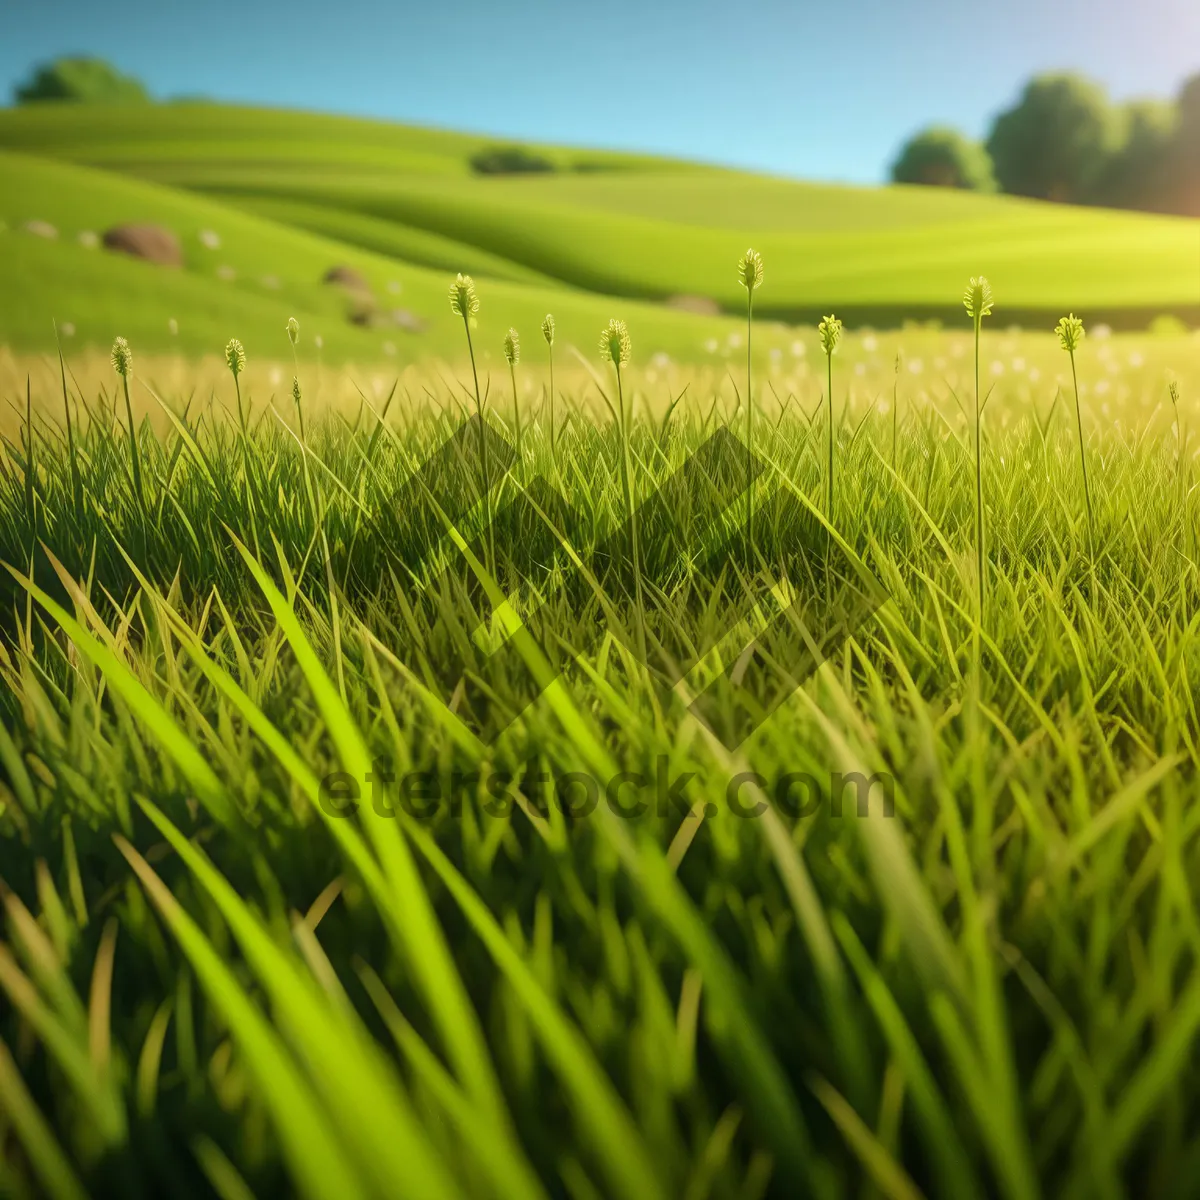 Picture of Vibrant Summer Wheat Field in Lush Green Meadow